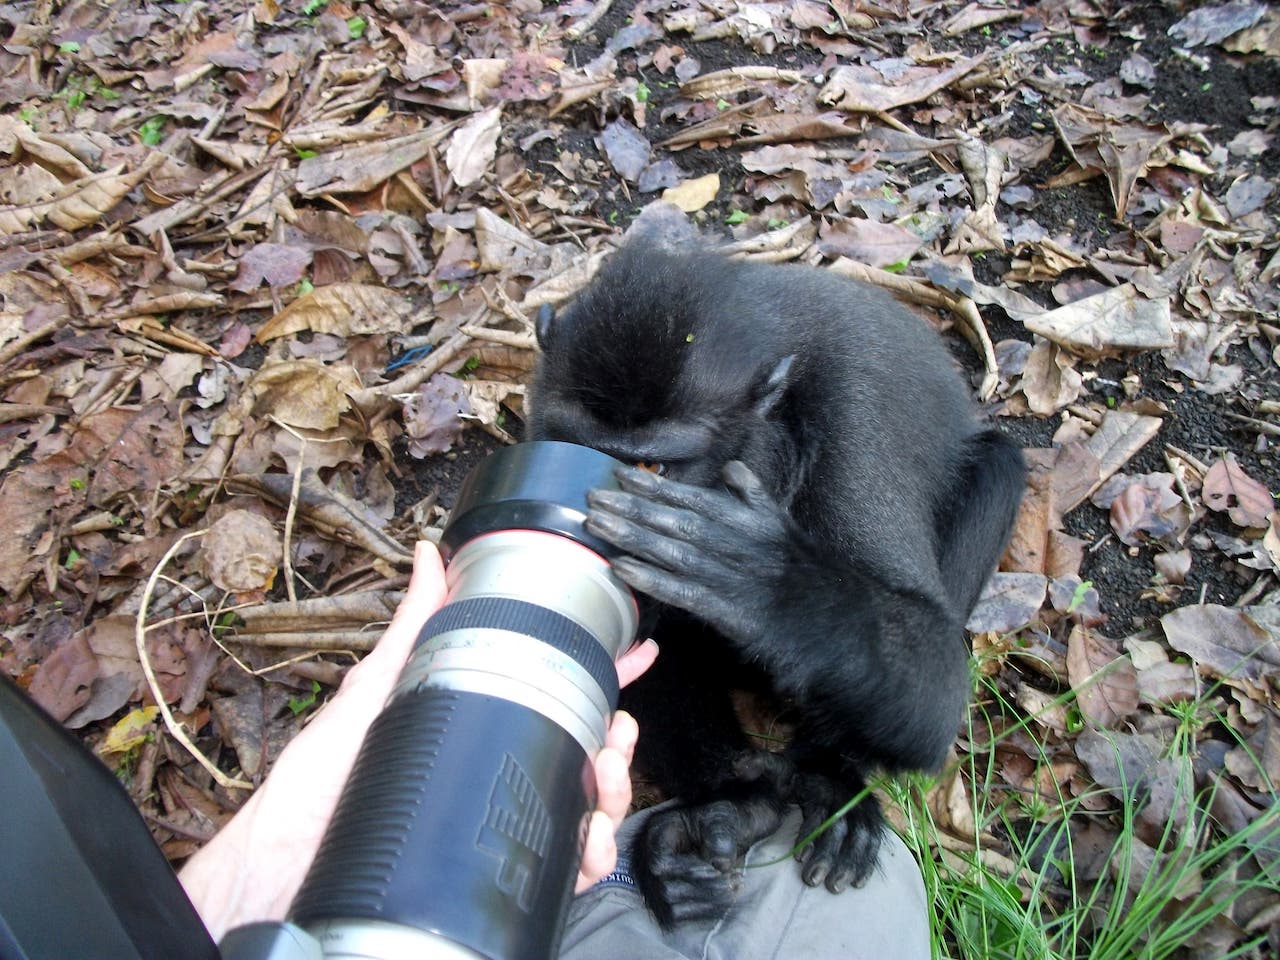 A black crested macaque peering into the lens of a camera